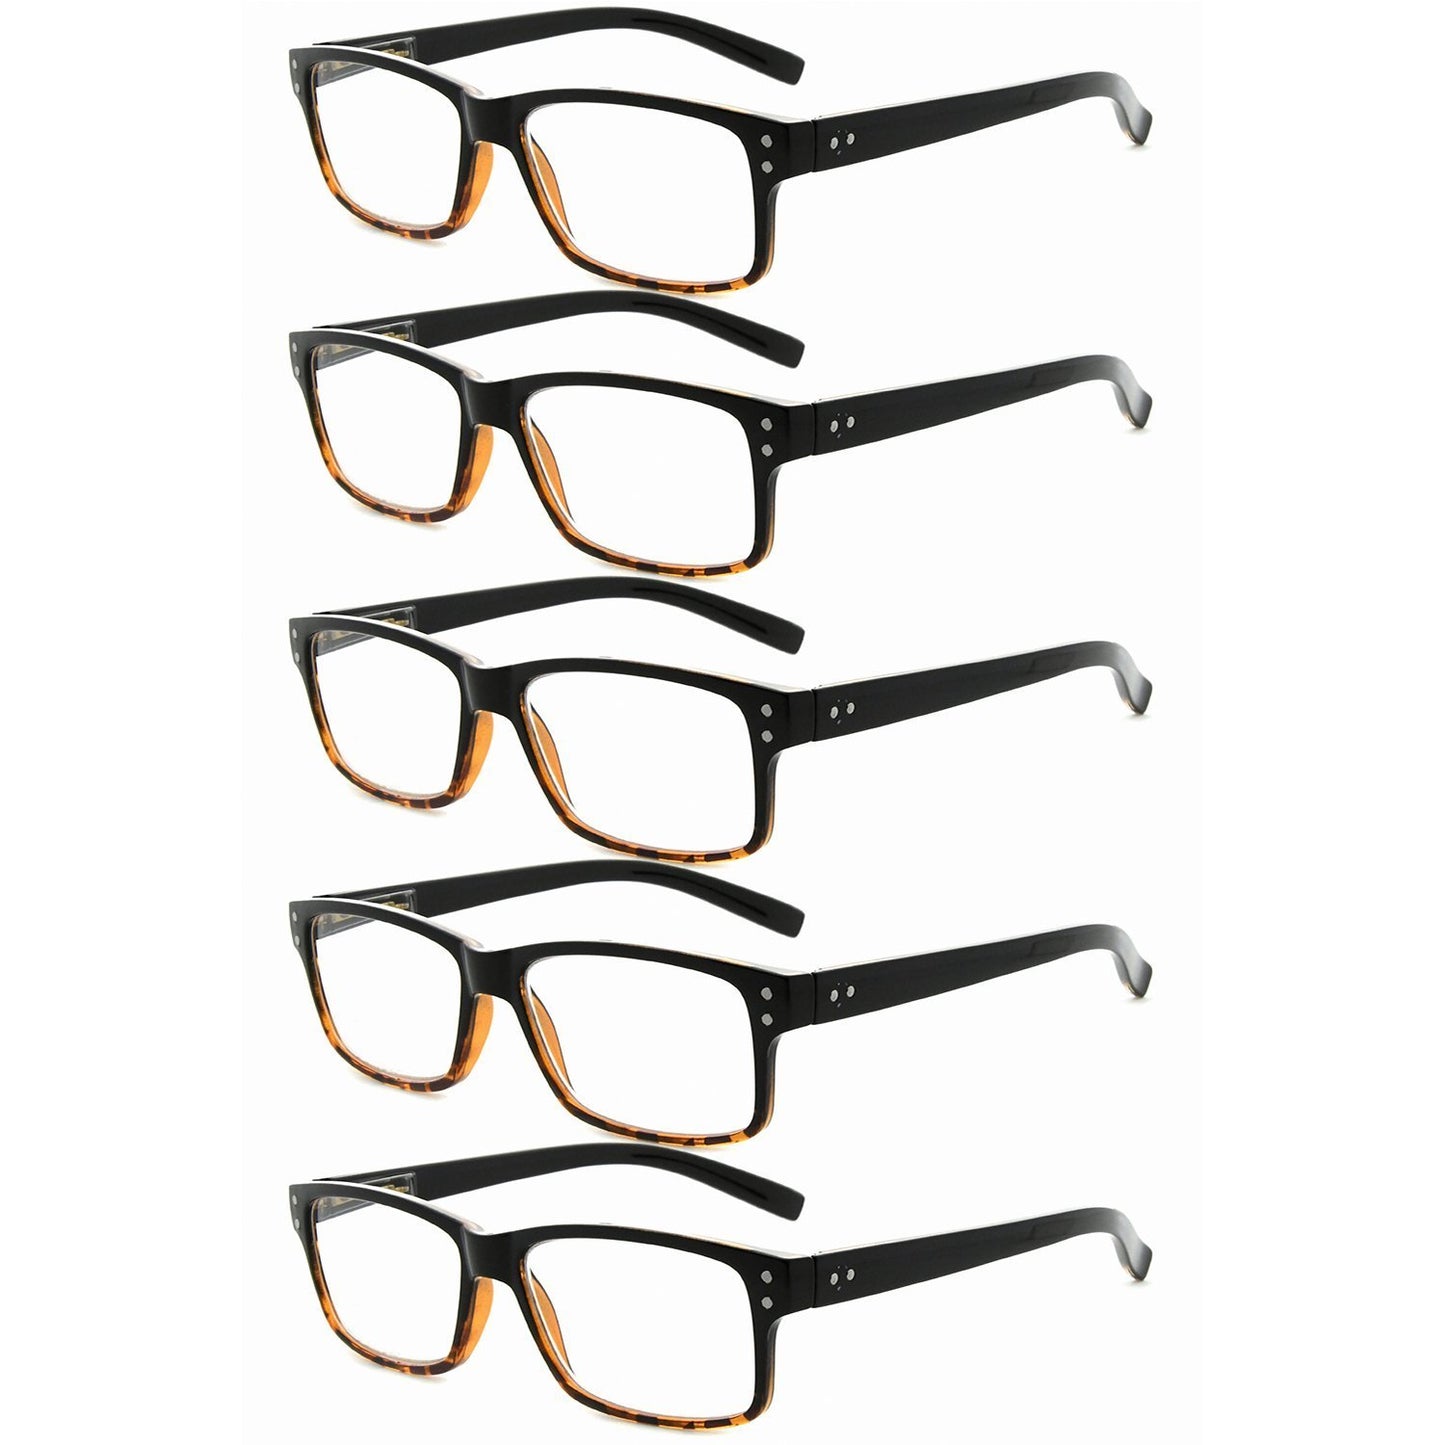 5 Pack Reading Glasses Classic Style for Men Women R032-A